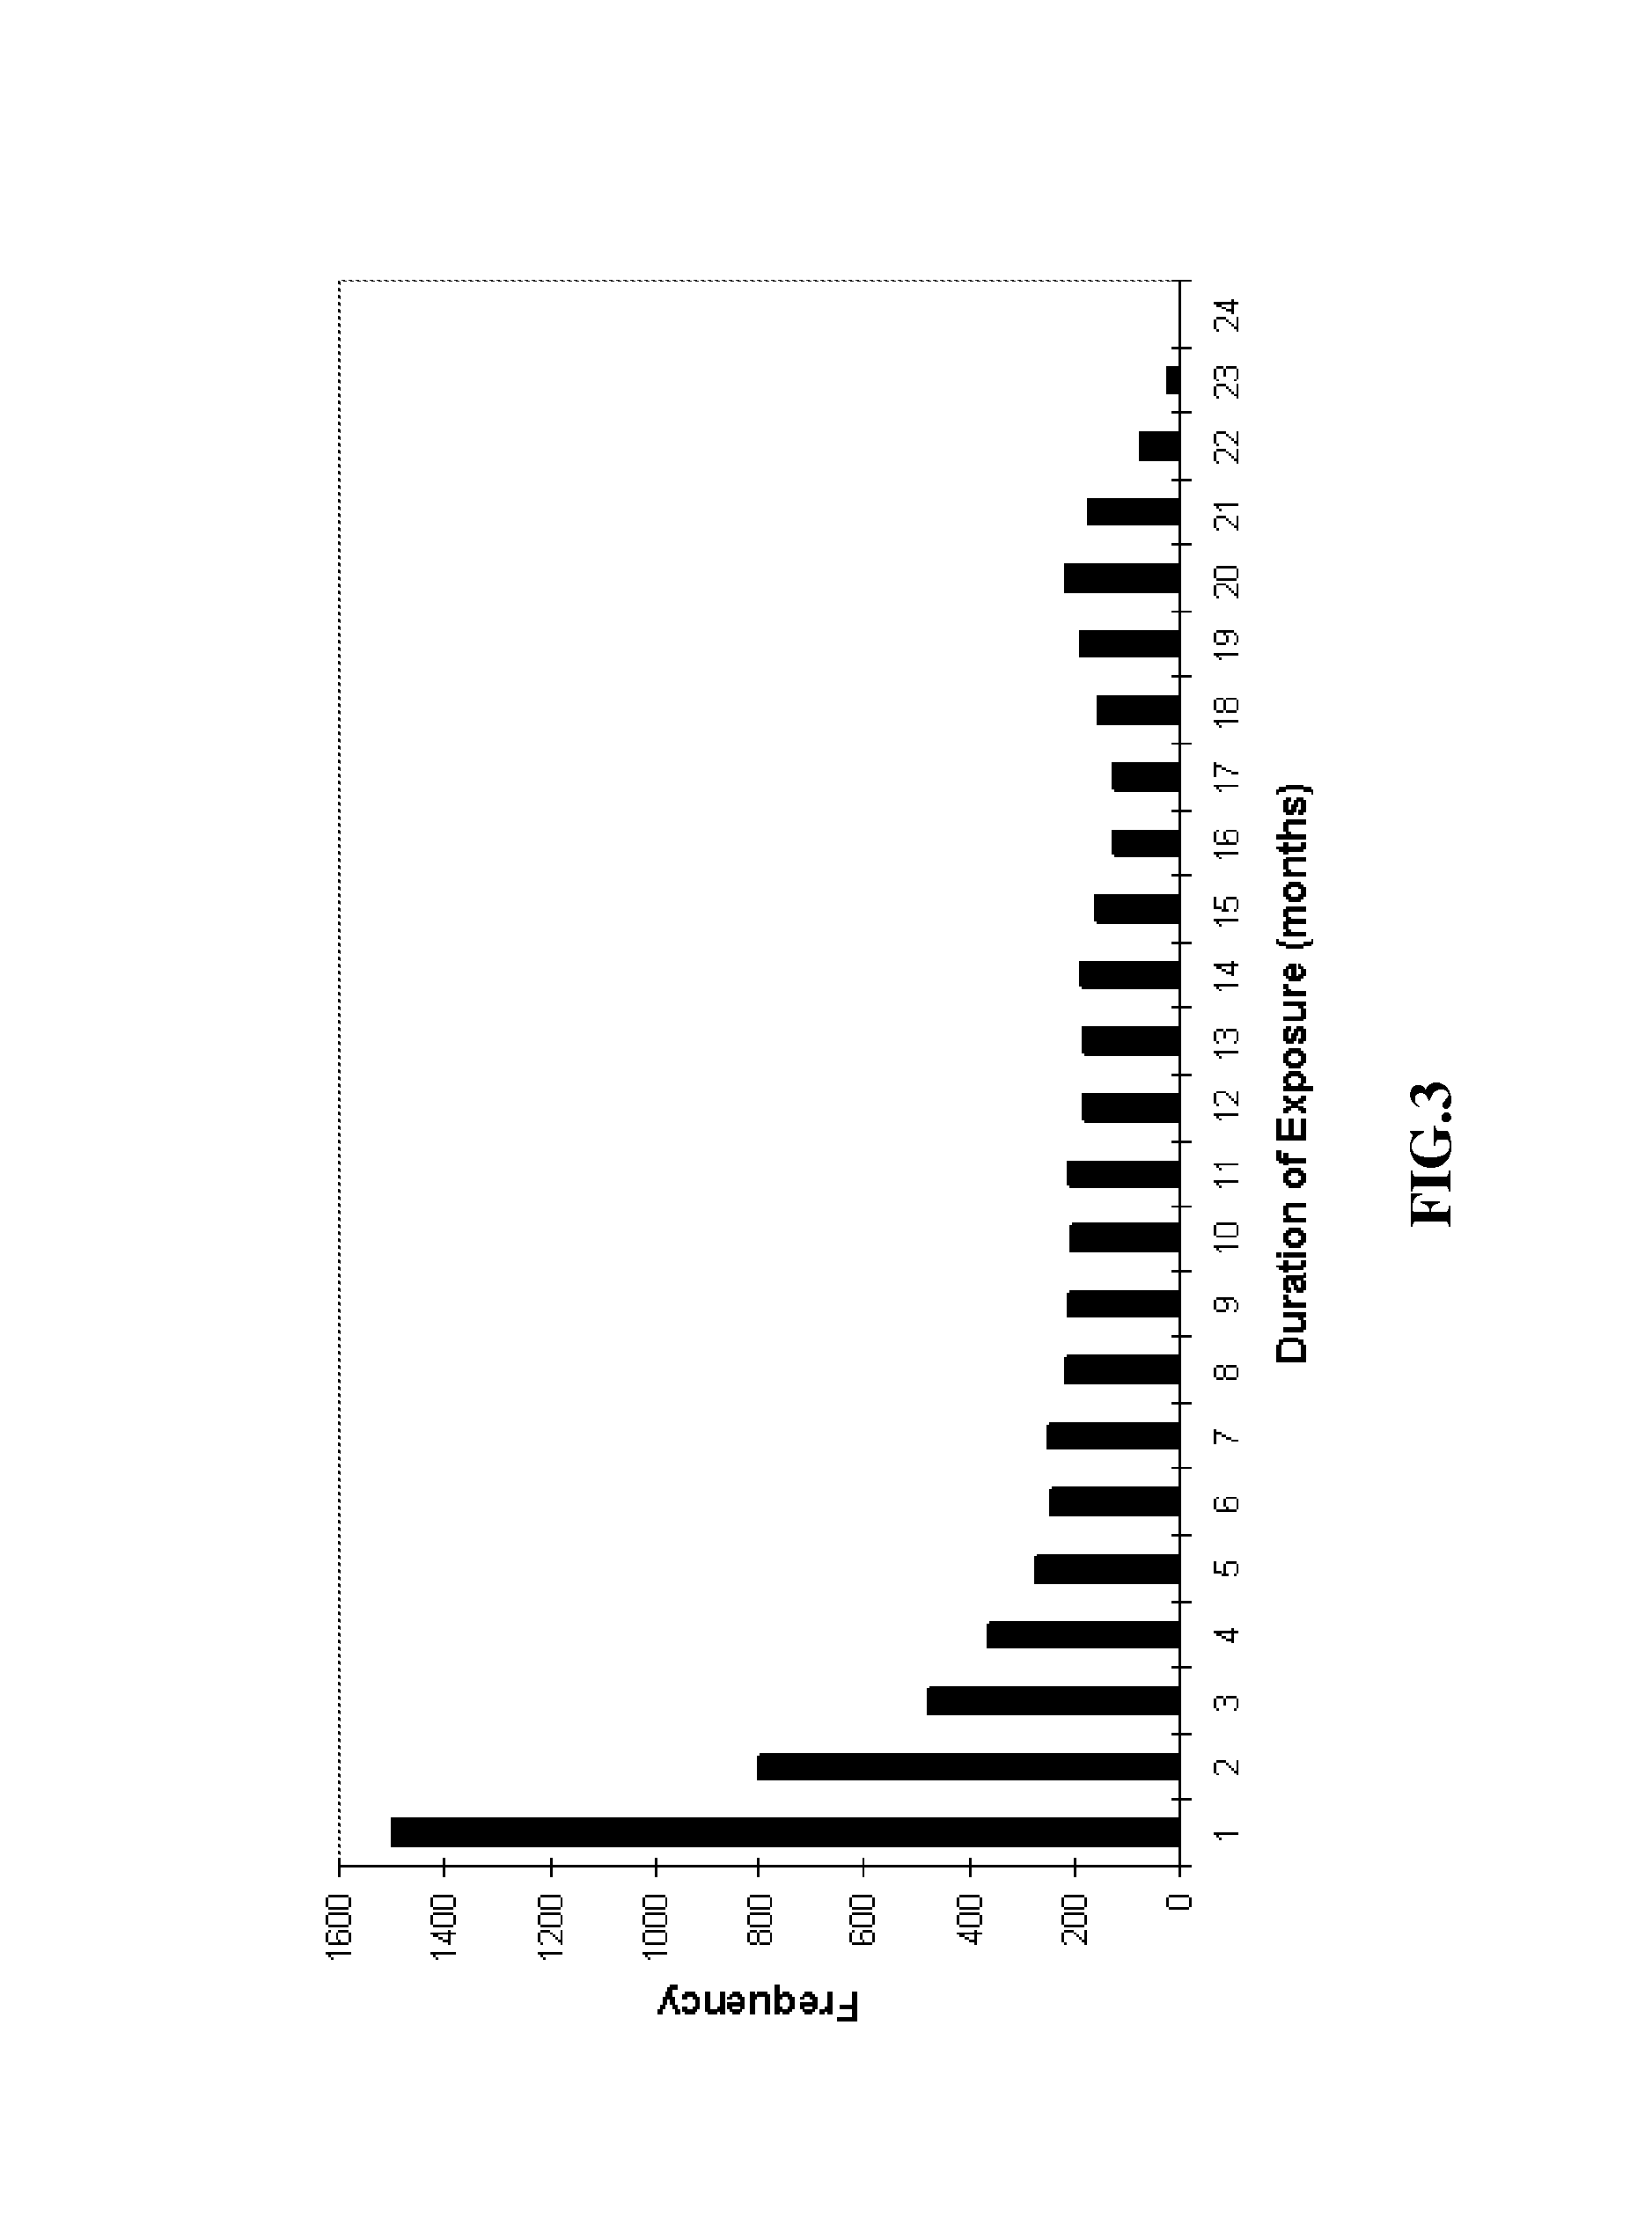 Method for treating a pulmonary hypertension condition without companion diagnosis